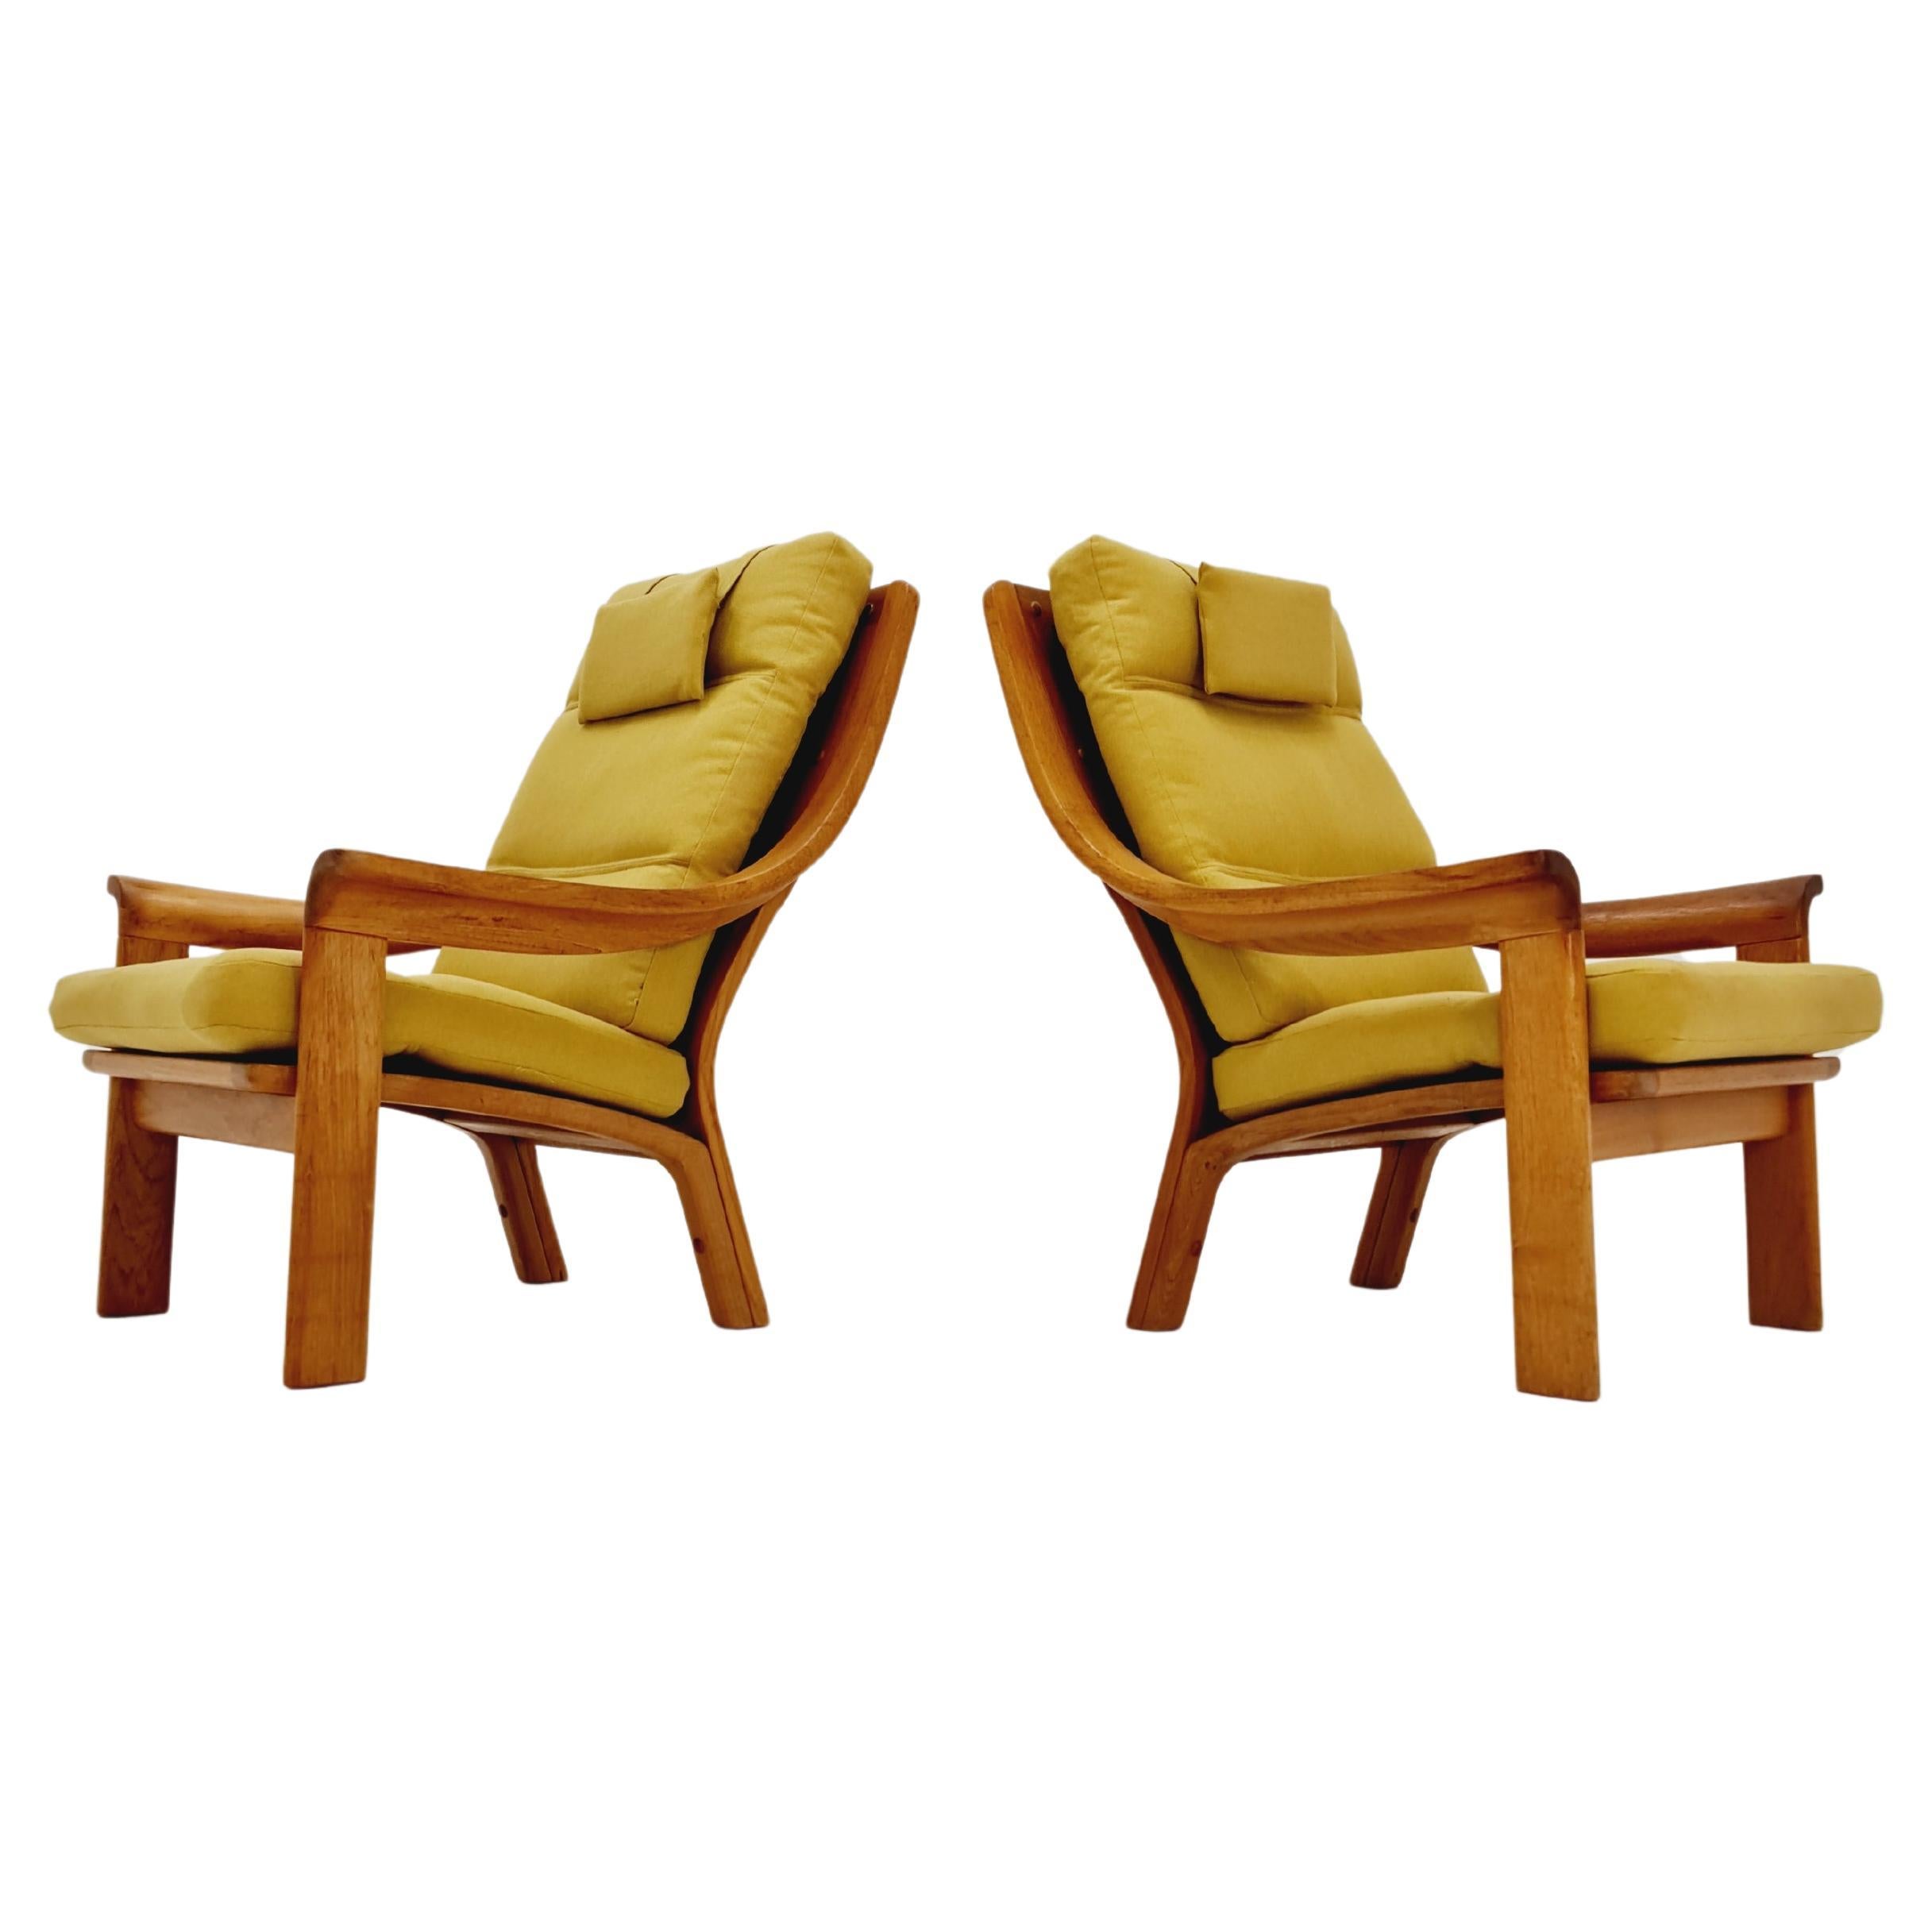 2 Mid century easy lounge chairs by P.Jeppesen in solid teak For Sale